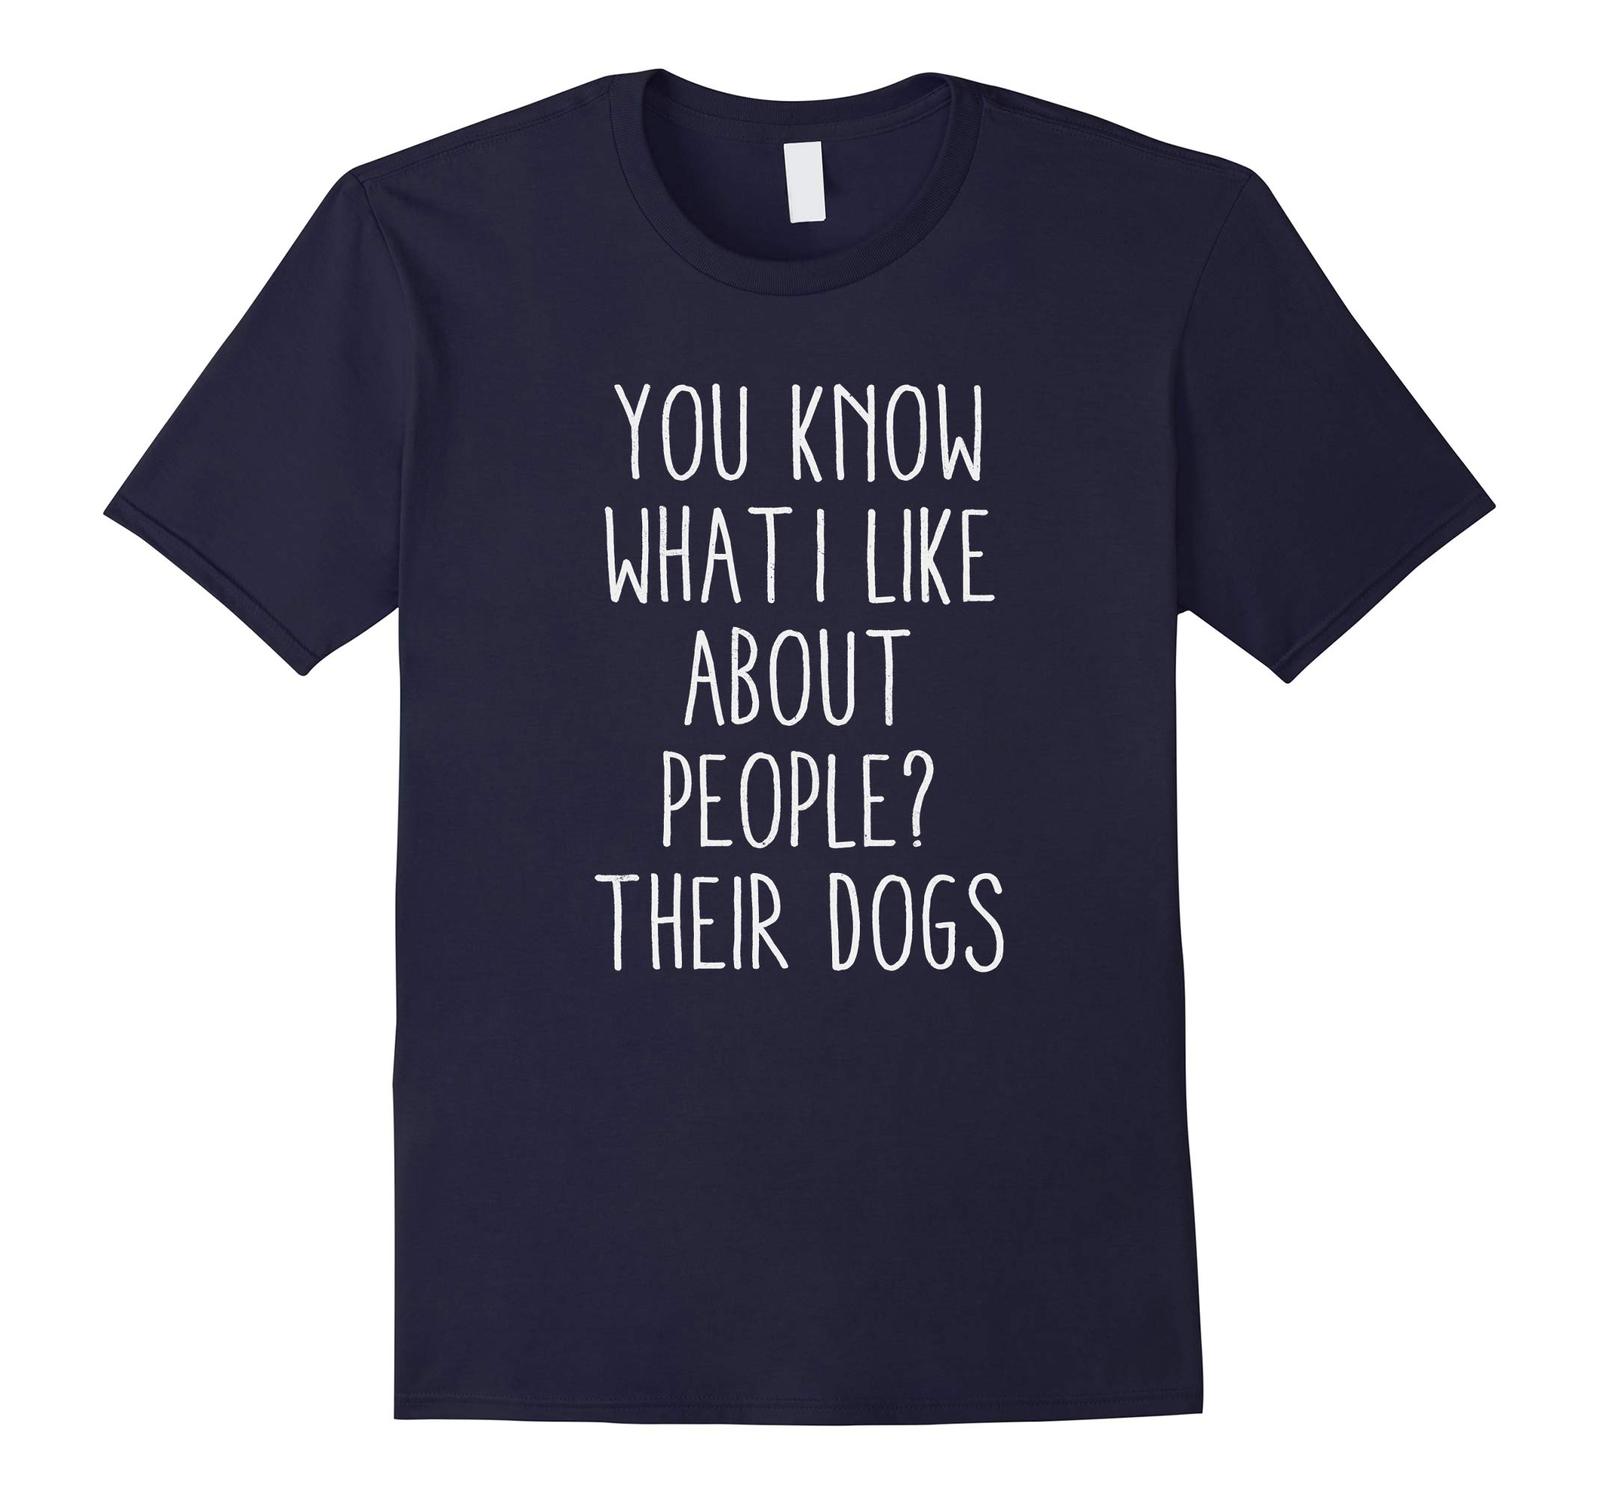 Dog Fashion - You know what I like about people? Their dogs. Funny t-shirt Men